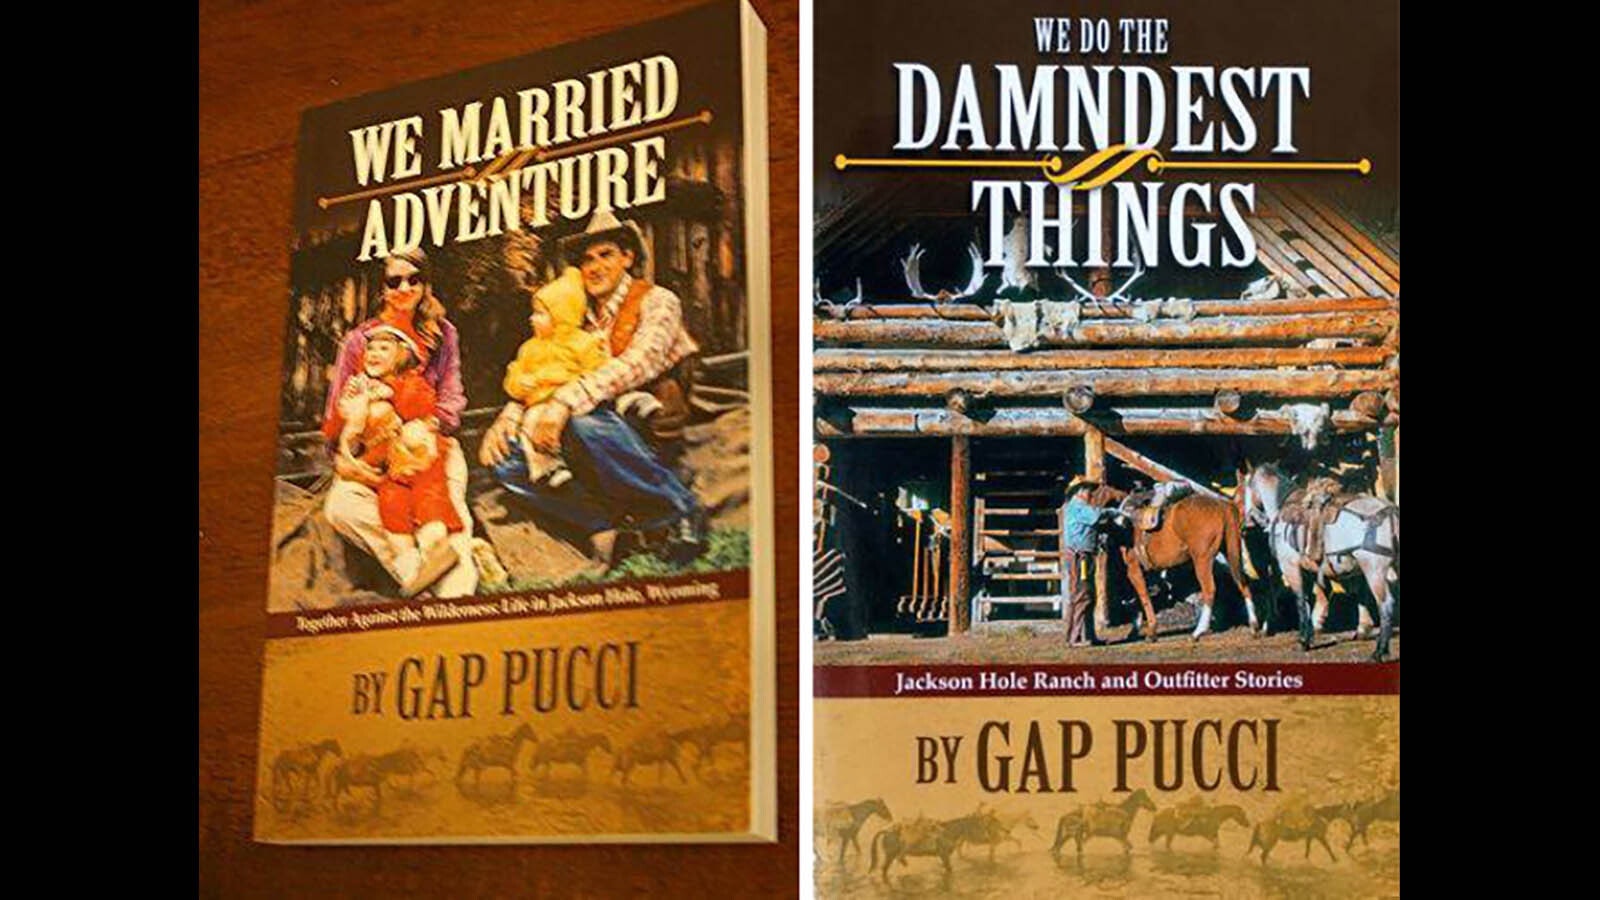 Gap Pucci has authored two books, with another on the way.